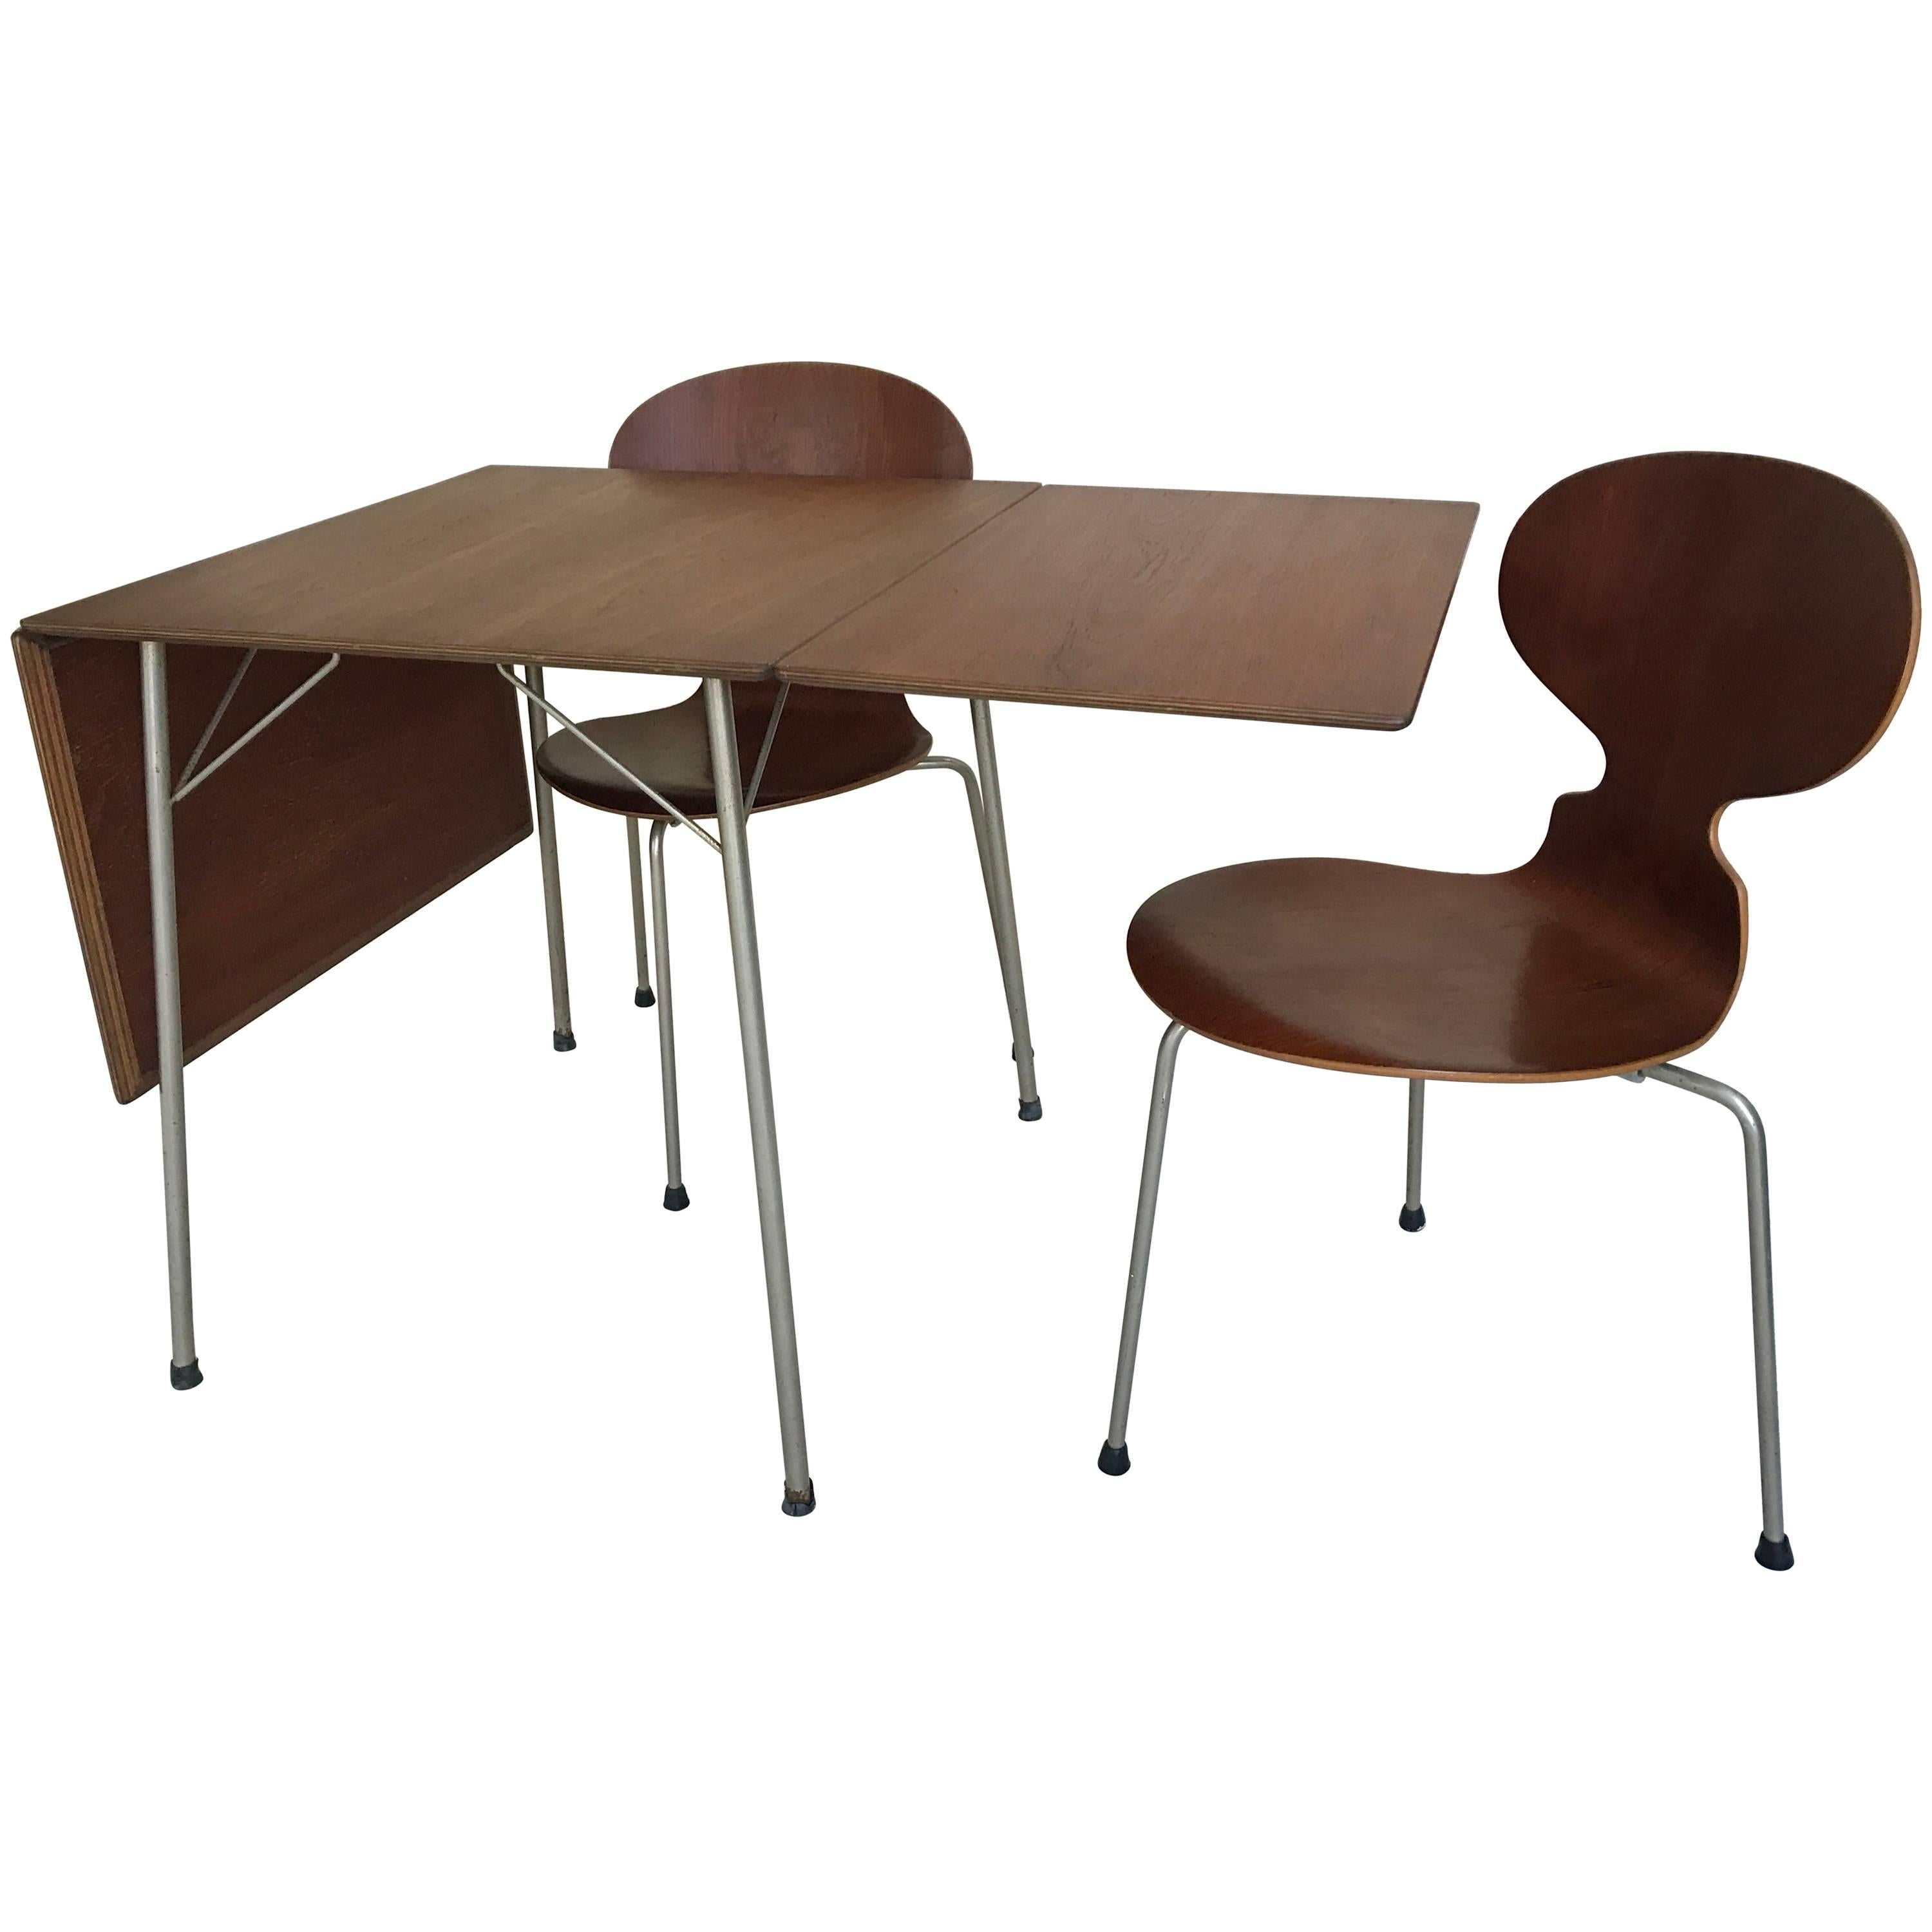 Early Petite Drop-Leaf Dining Table Set by Arne Jacobsen for Fritz Hansen